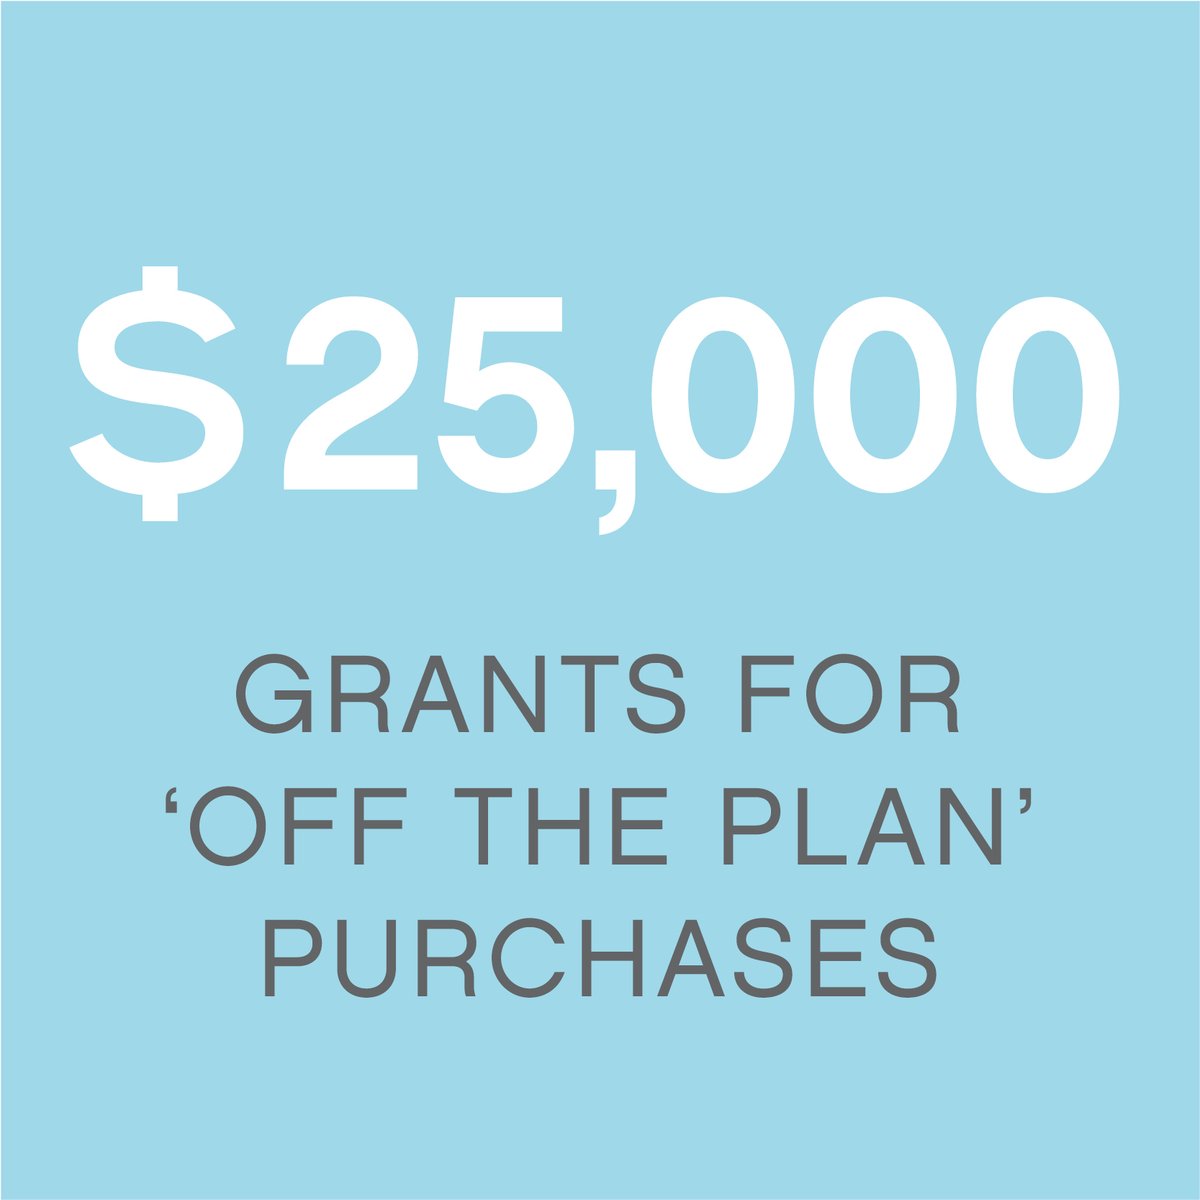 $25,000 grants for 'off the plan' purchases